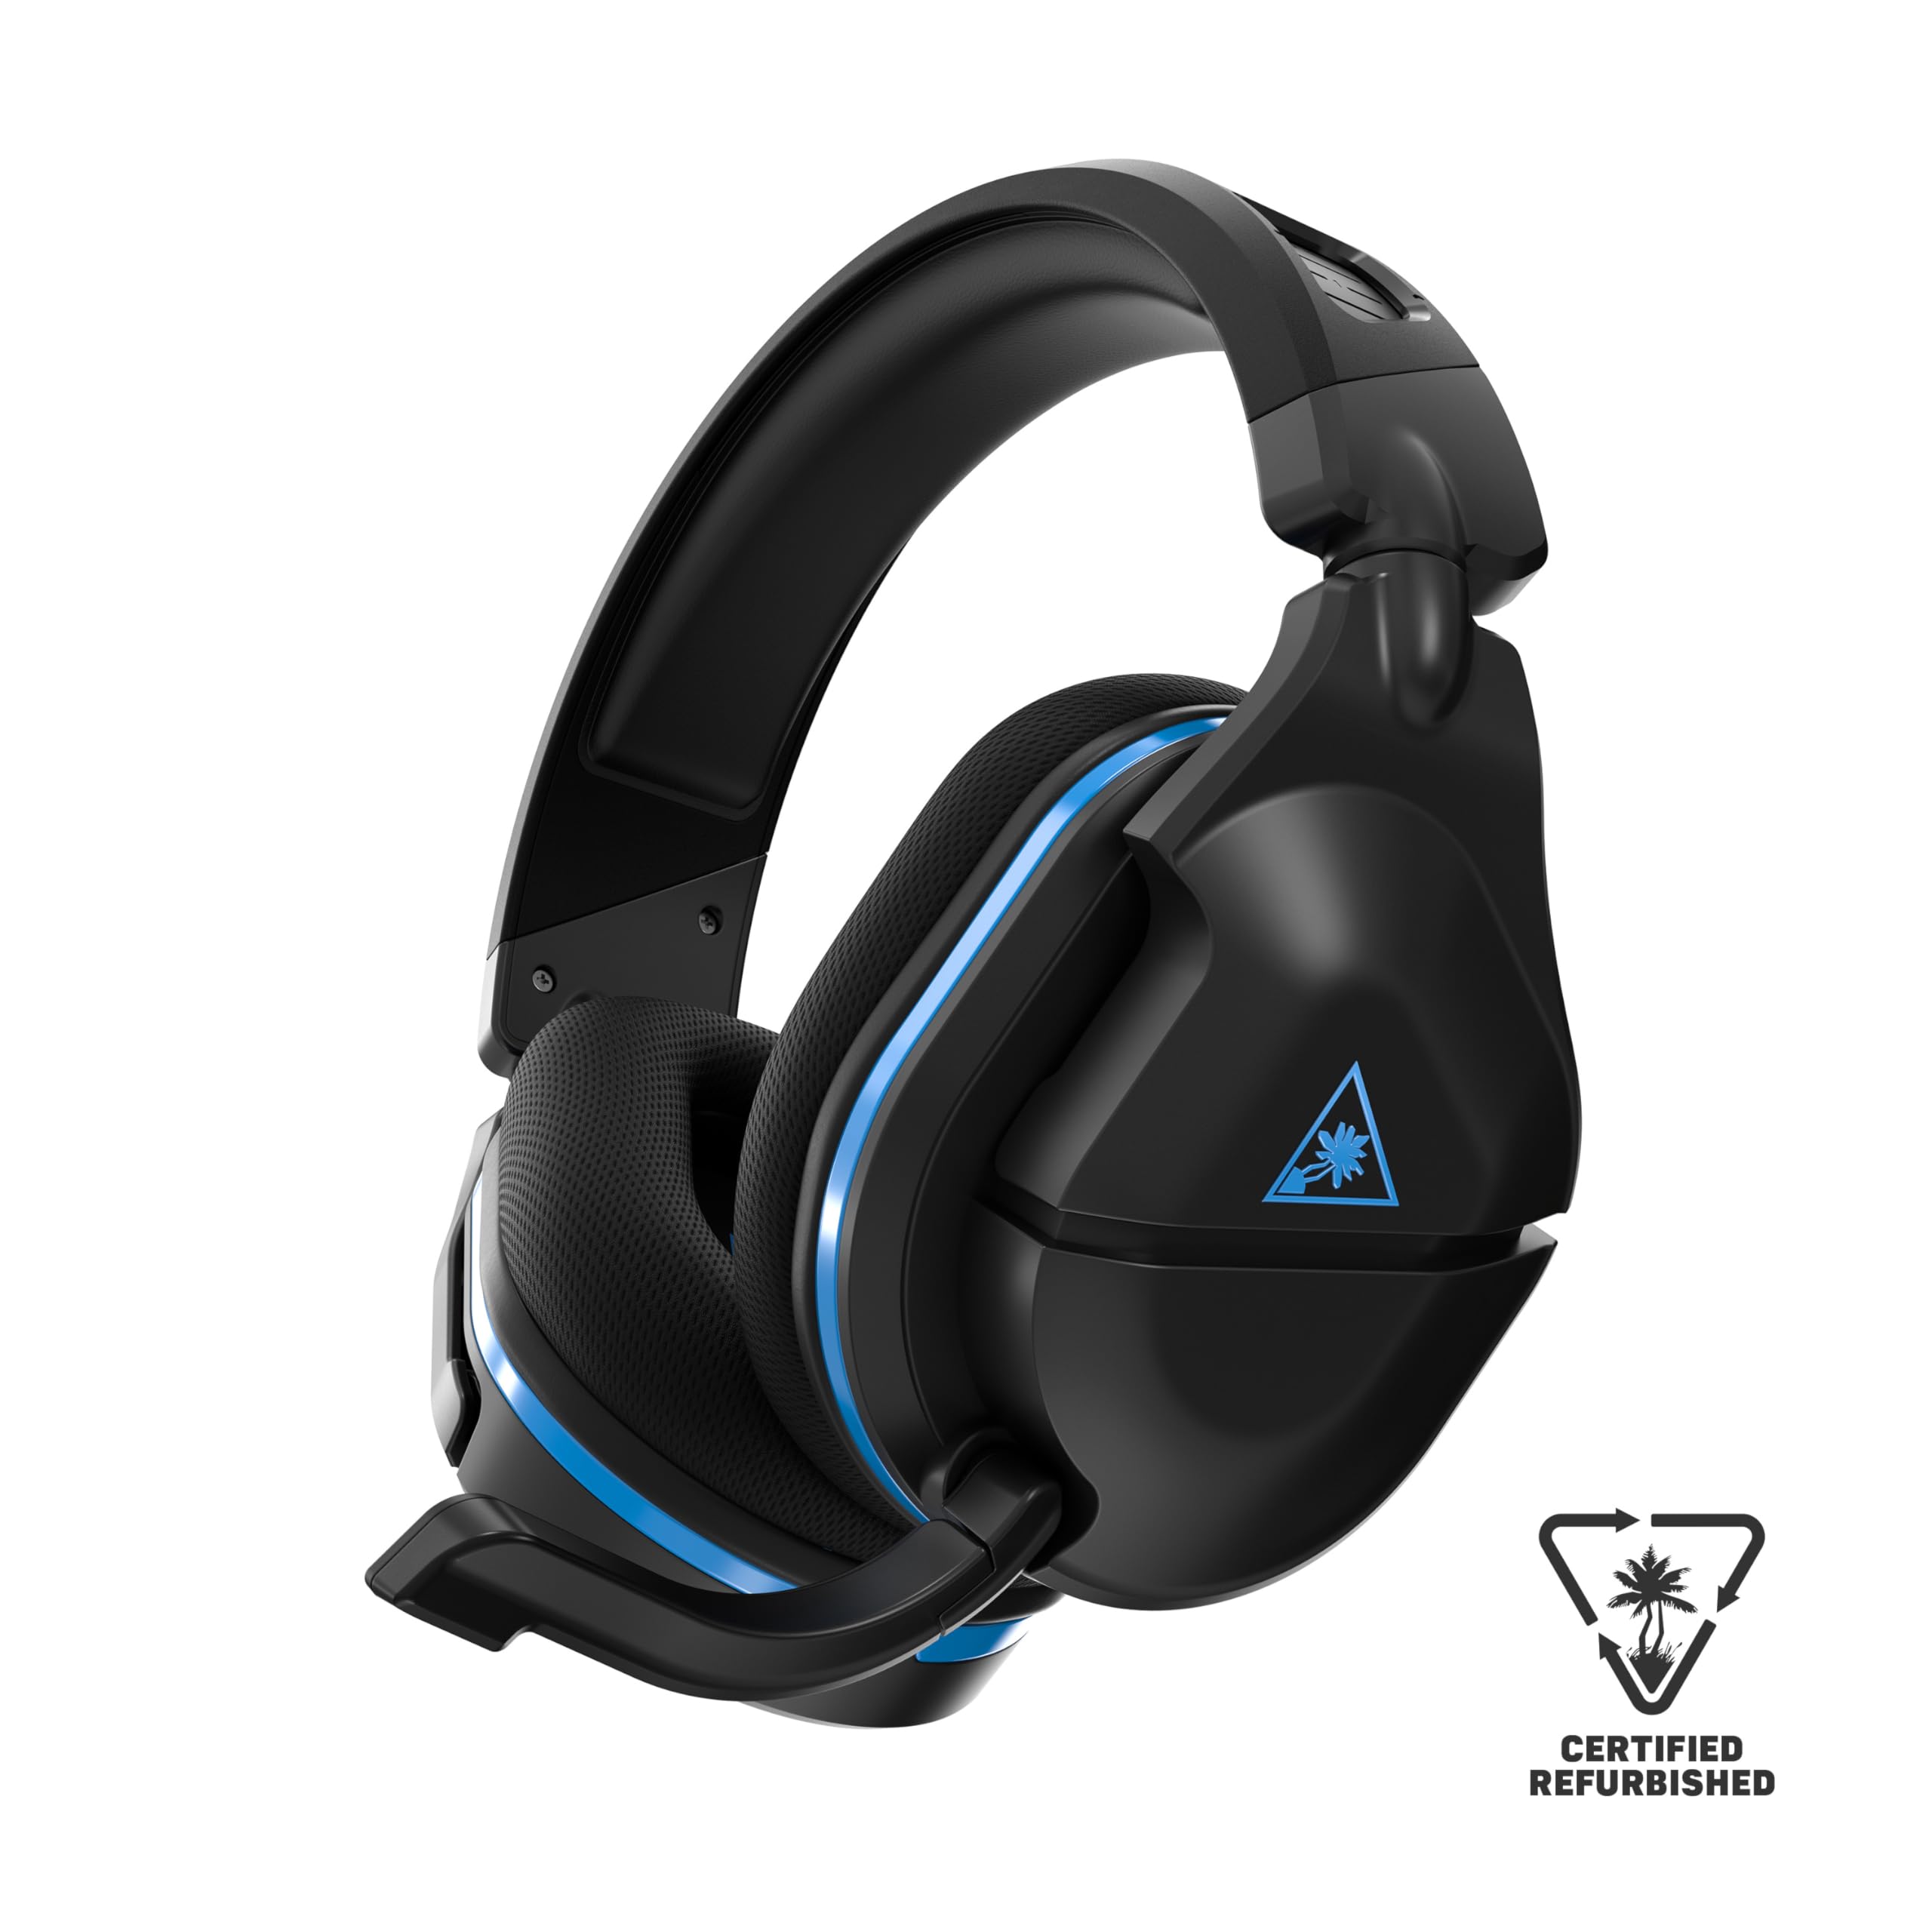 Turtle Beach Stealth 600 Gen 2 USB Wireless Amplified Gaming Headset for PS5, PS4, PS4 Pro, Nintendo Switch, PC & Mac with 24+ Hour Battery, Lag-Free Wireless, & Sony 3D Audio – Black (Renewed)